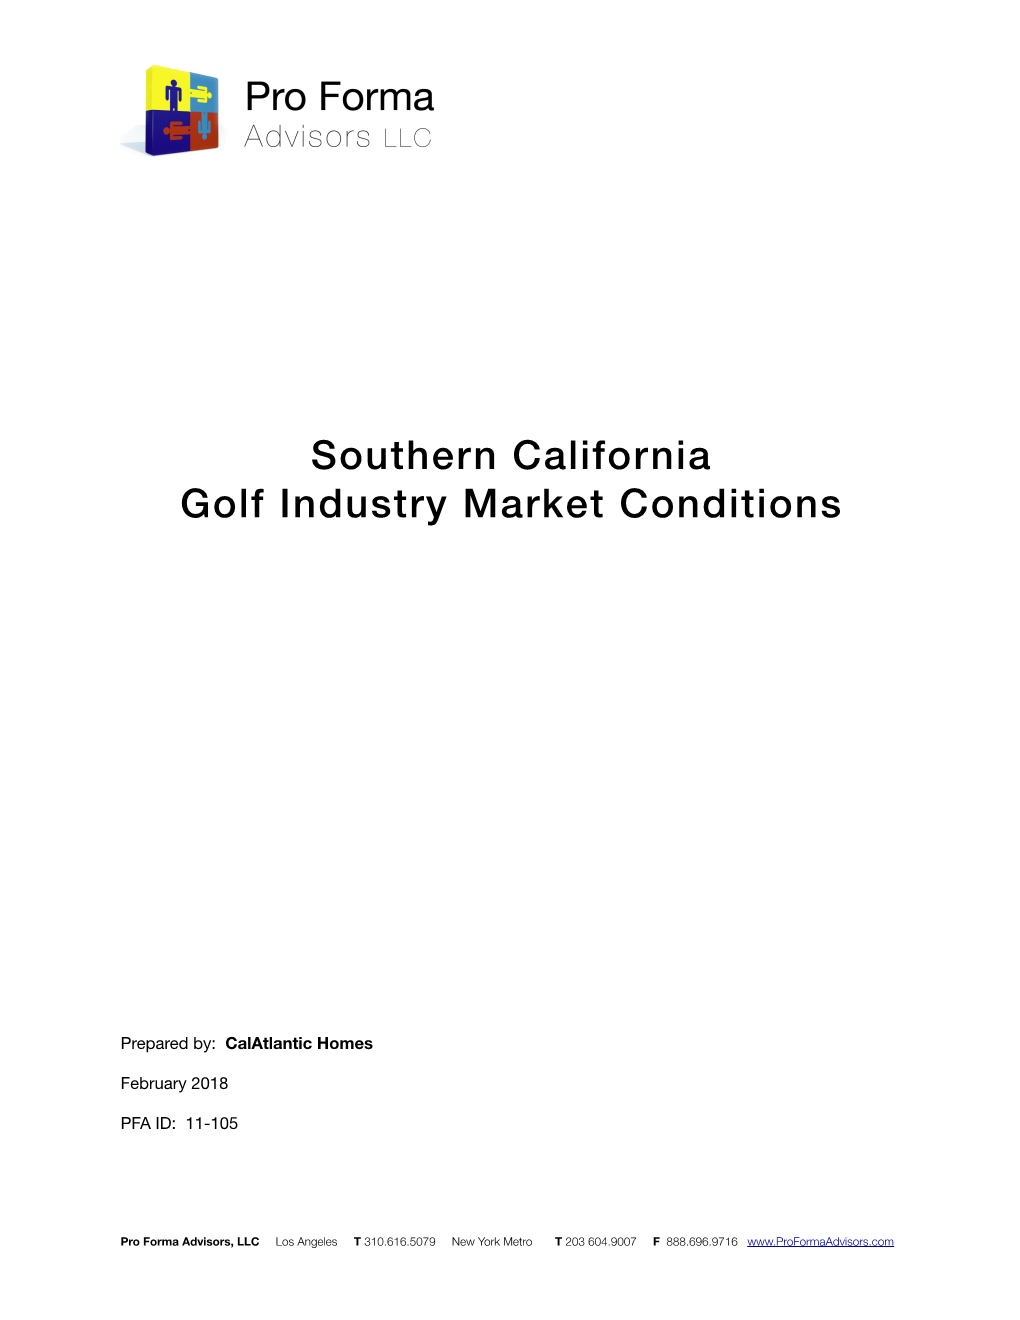 Southern California Golf Industry Market Conditions